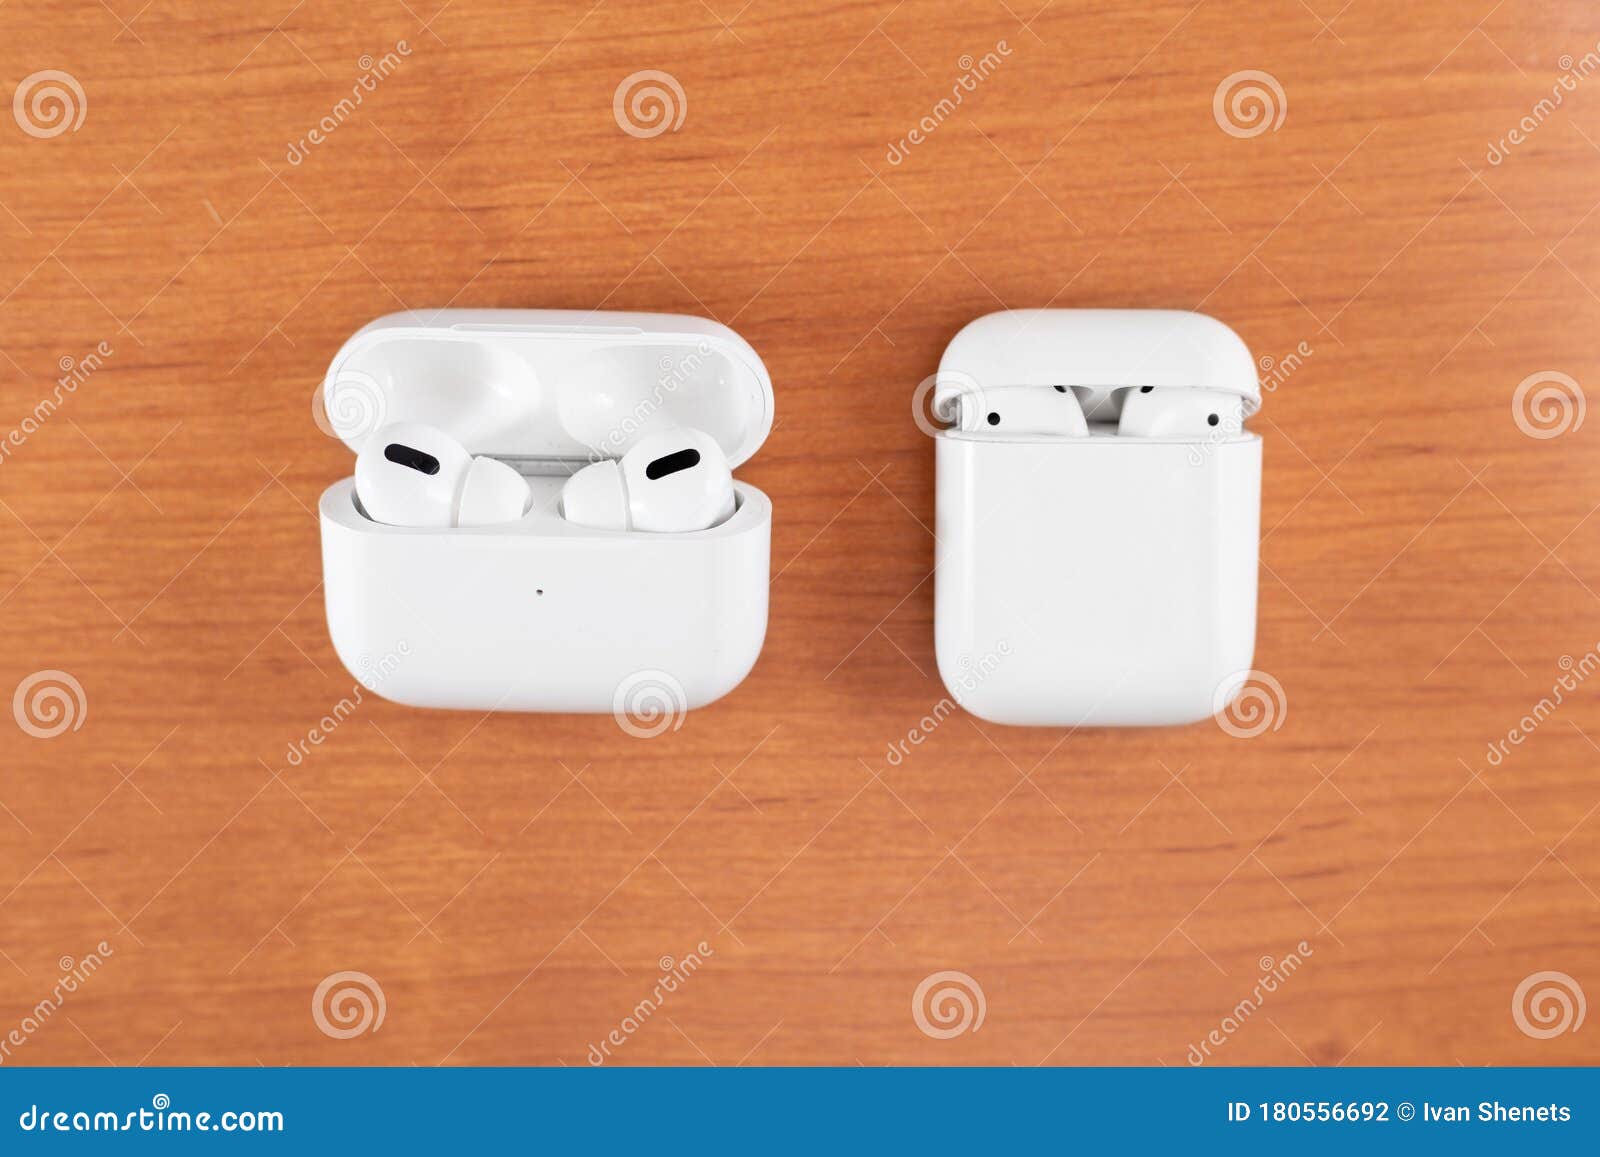 air pods pro. with wireless charging case. new airpods pro on wooden background. air pods. copy space